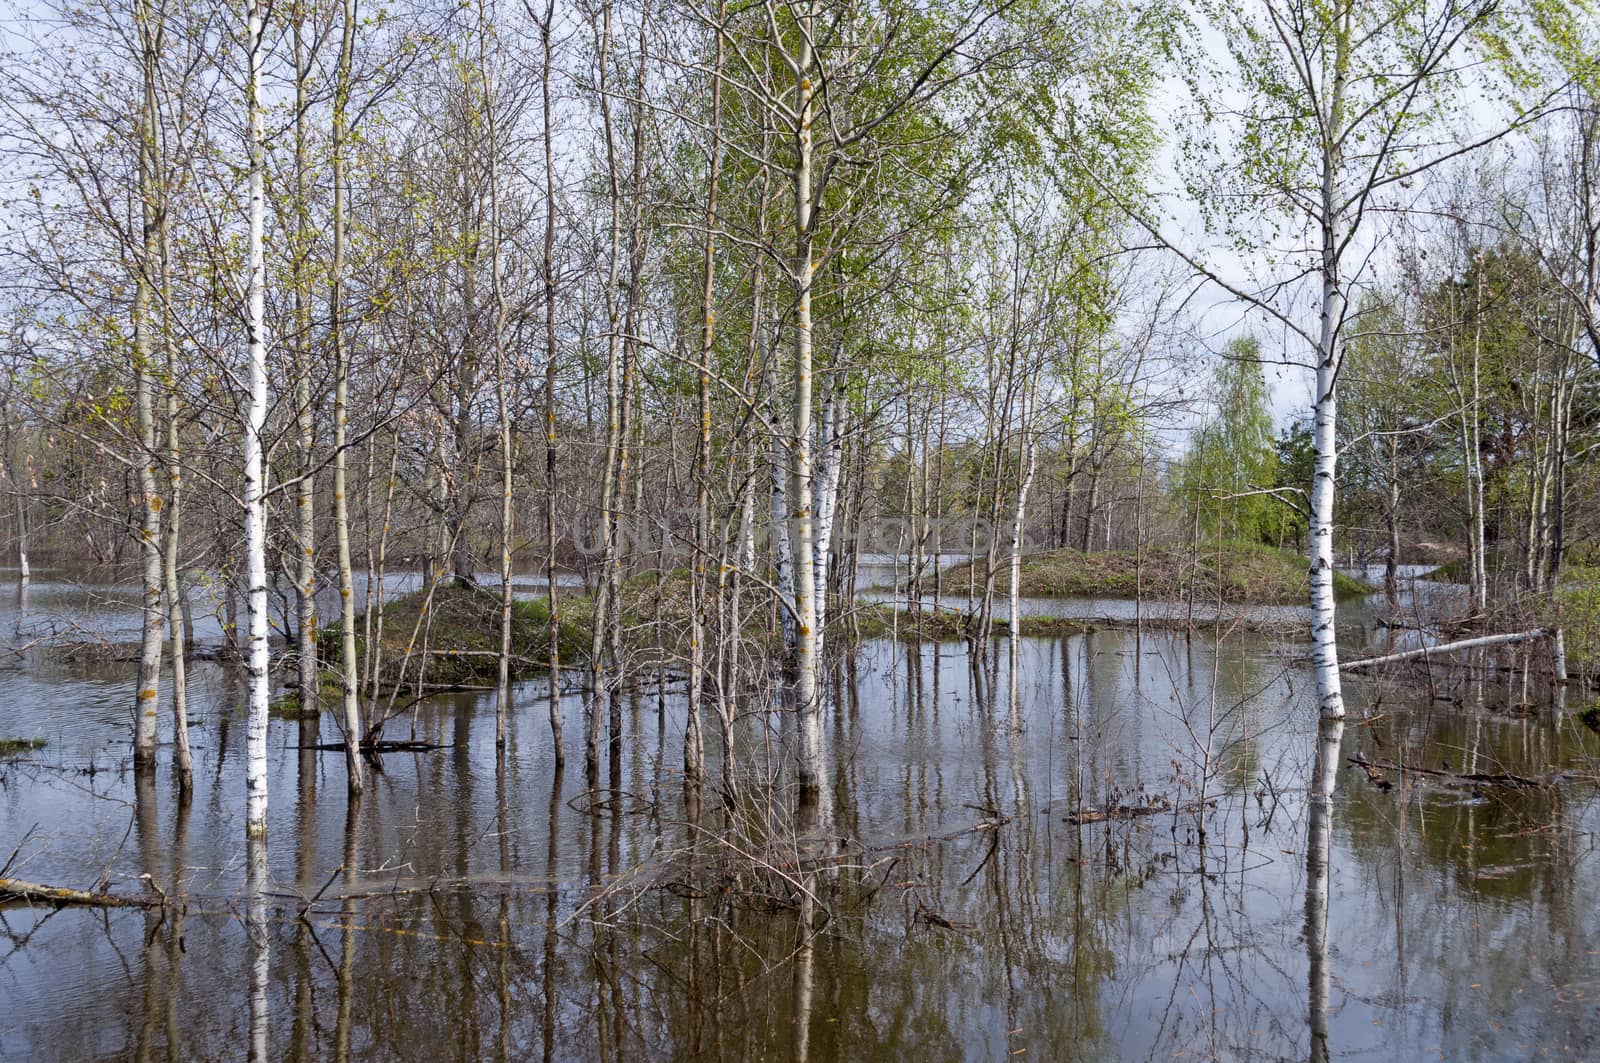 Trees standing in water during a spring flood